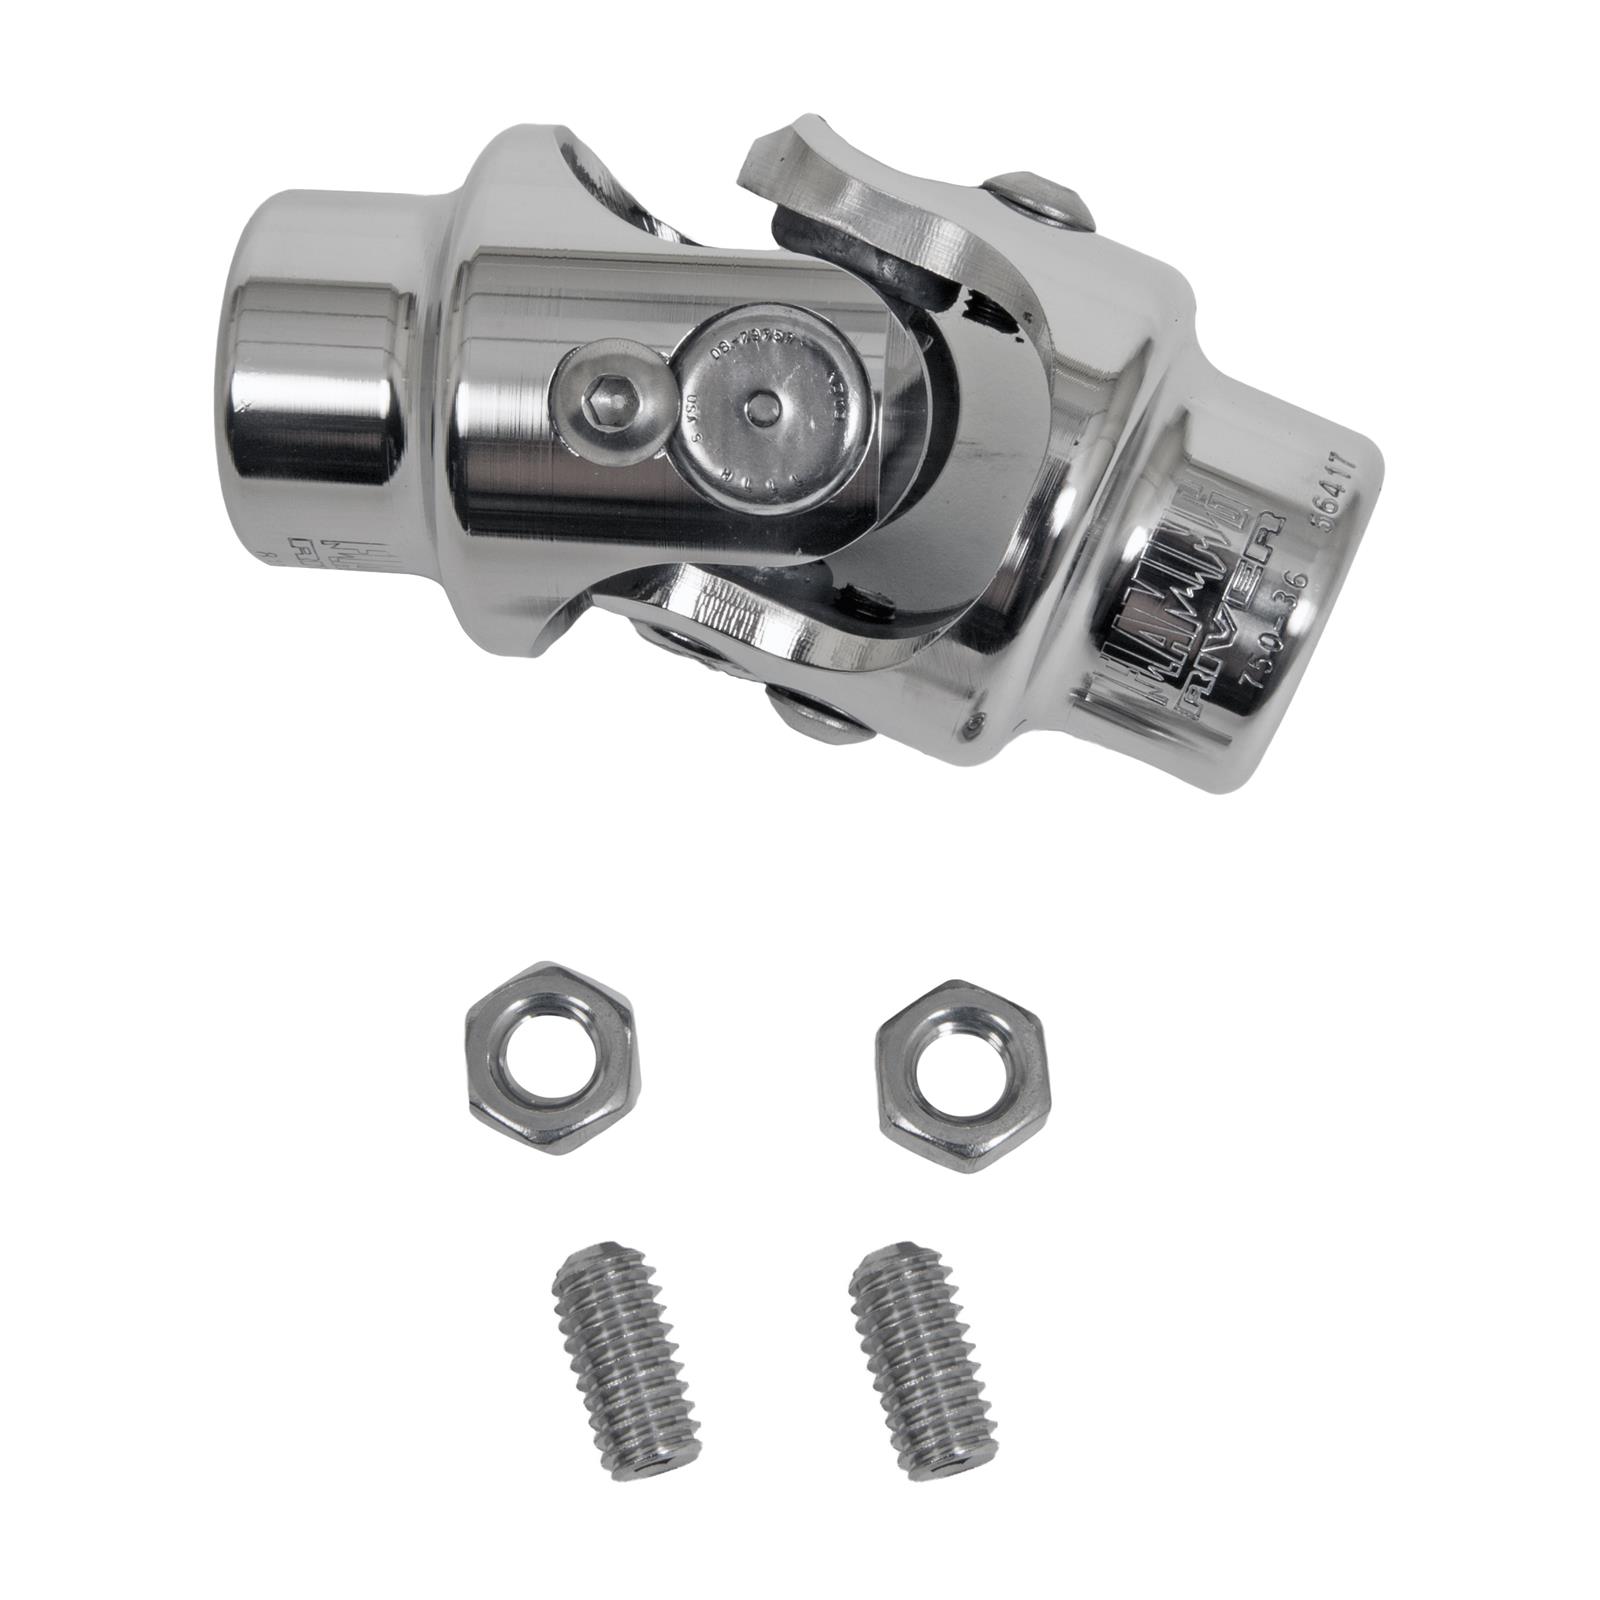 Stainless steel universal joint